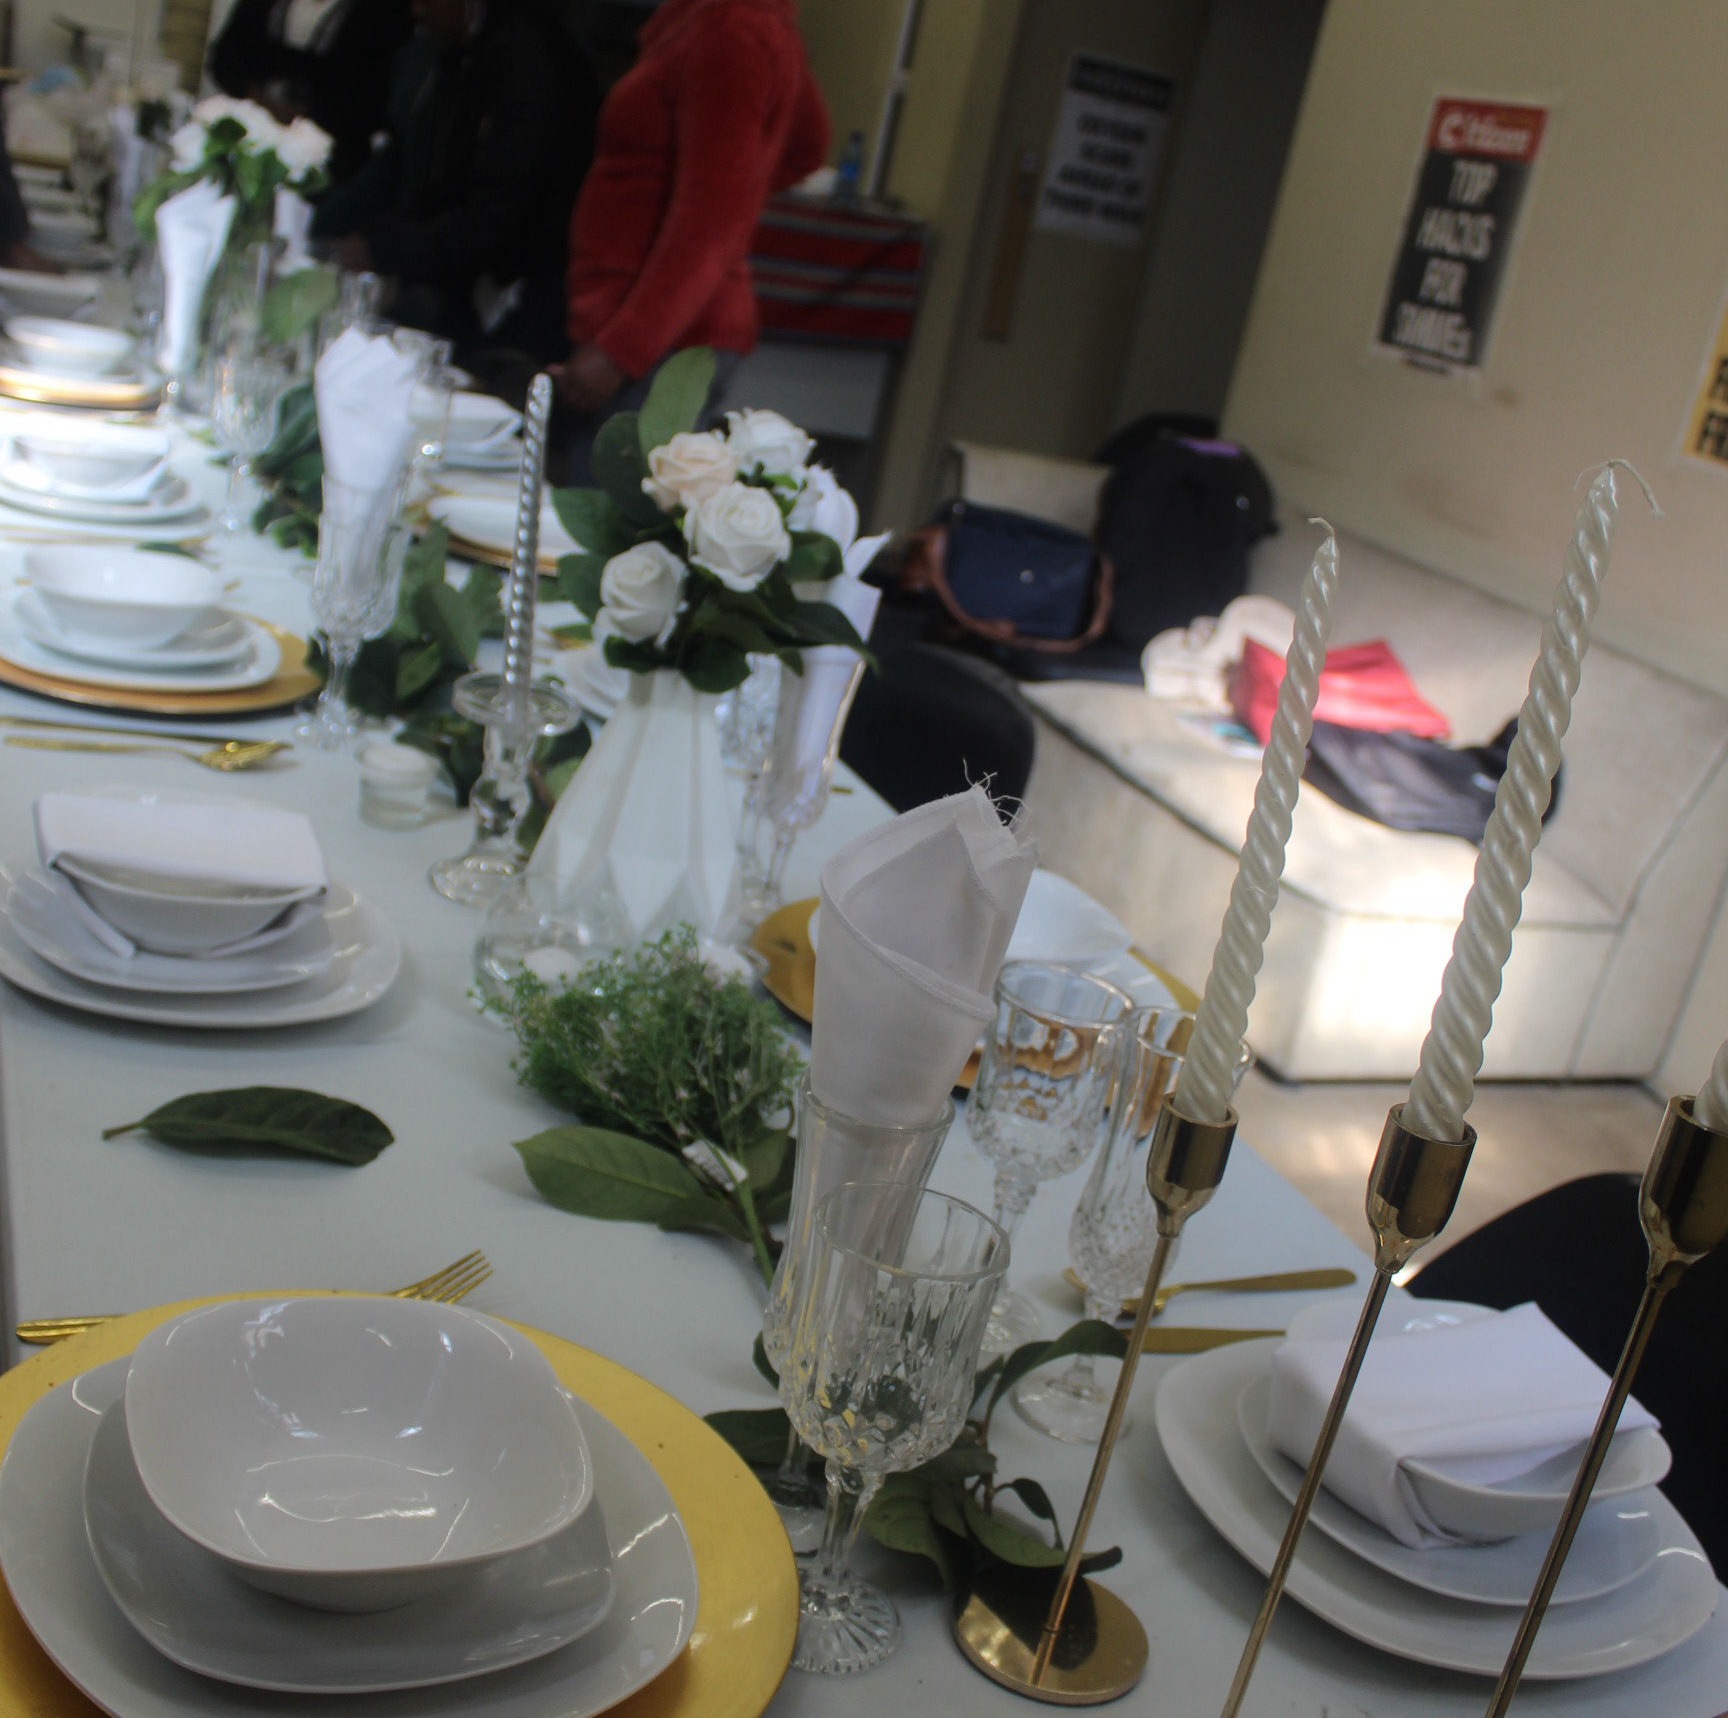 A table decorated by some of the Décor students